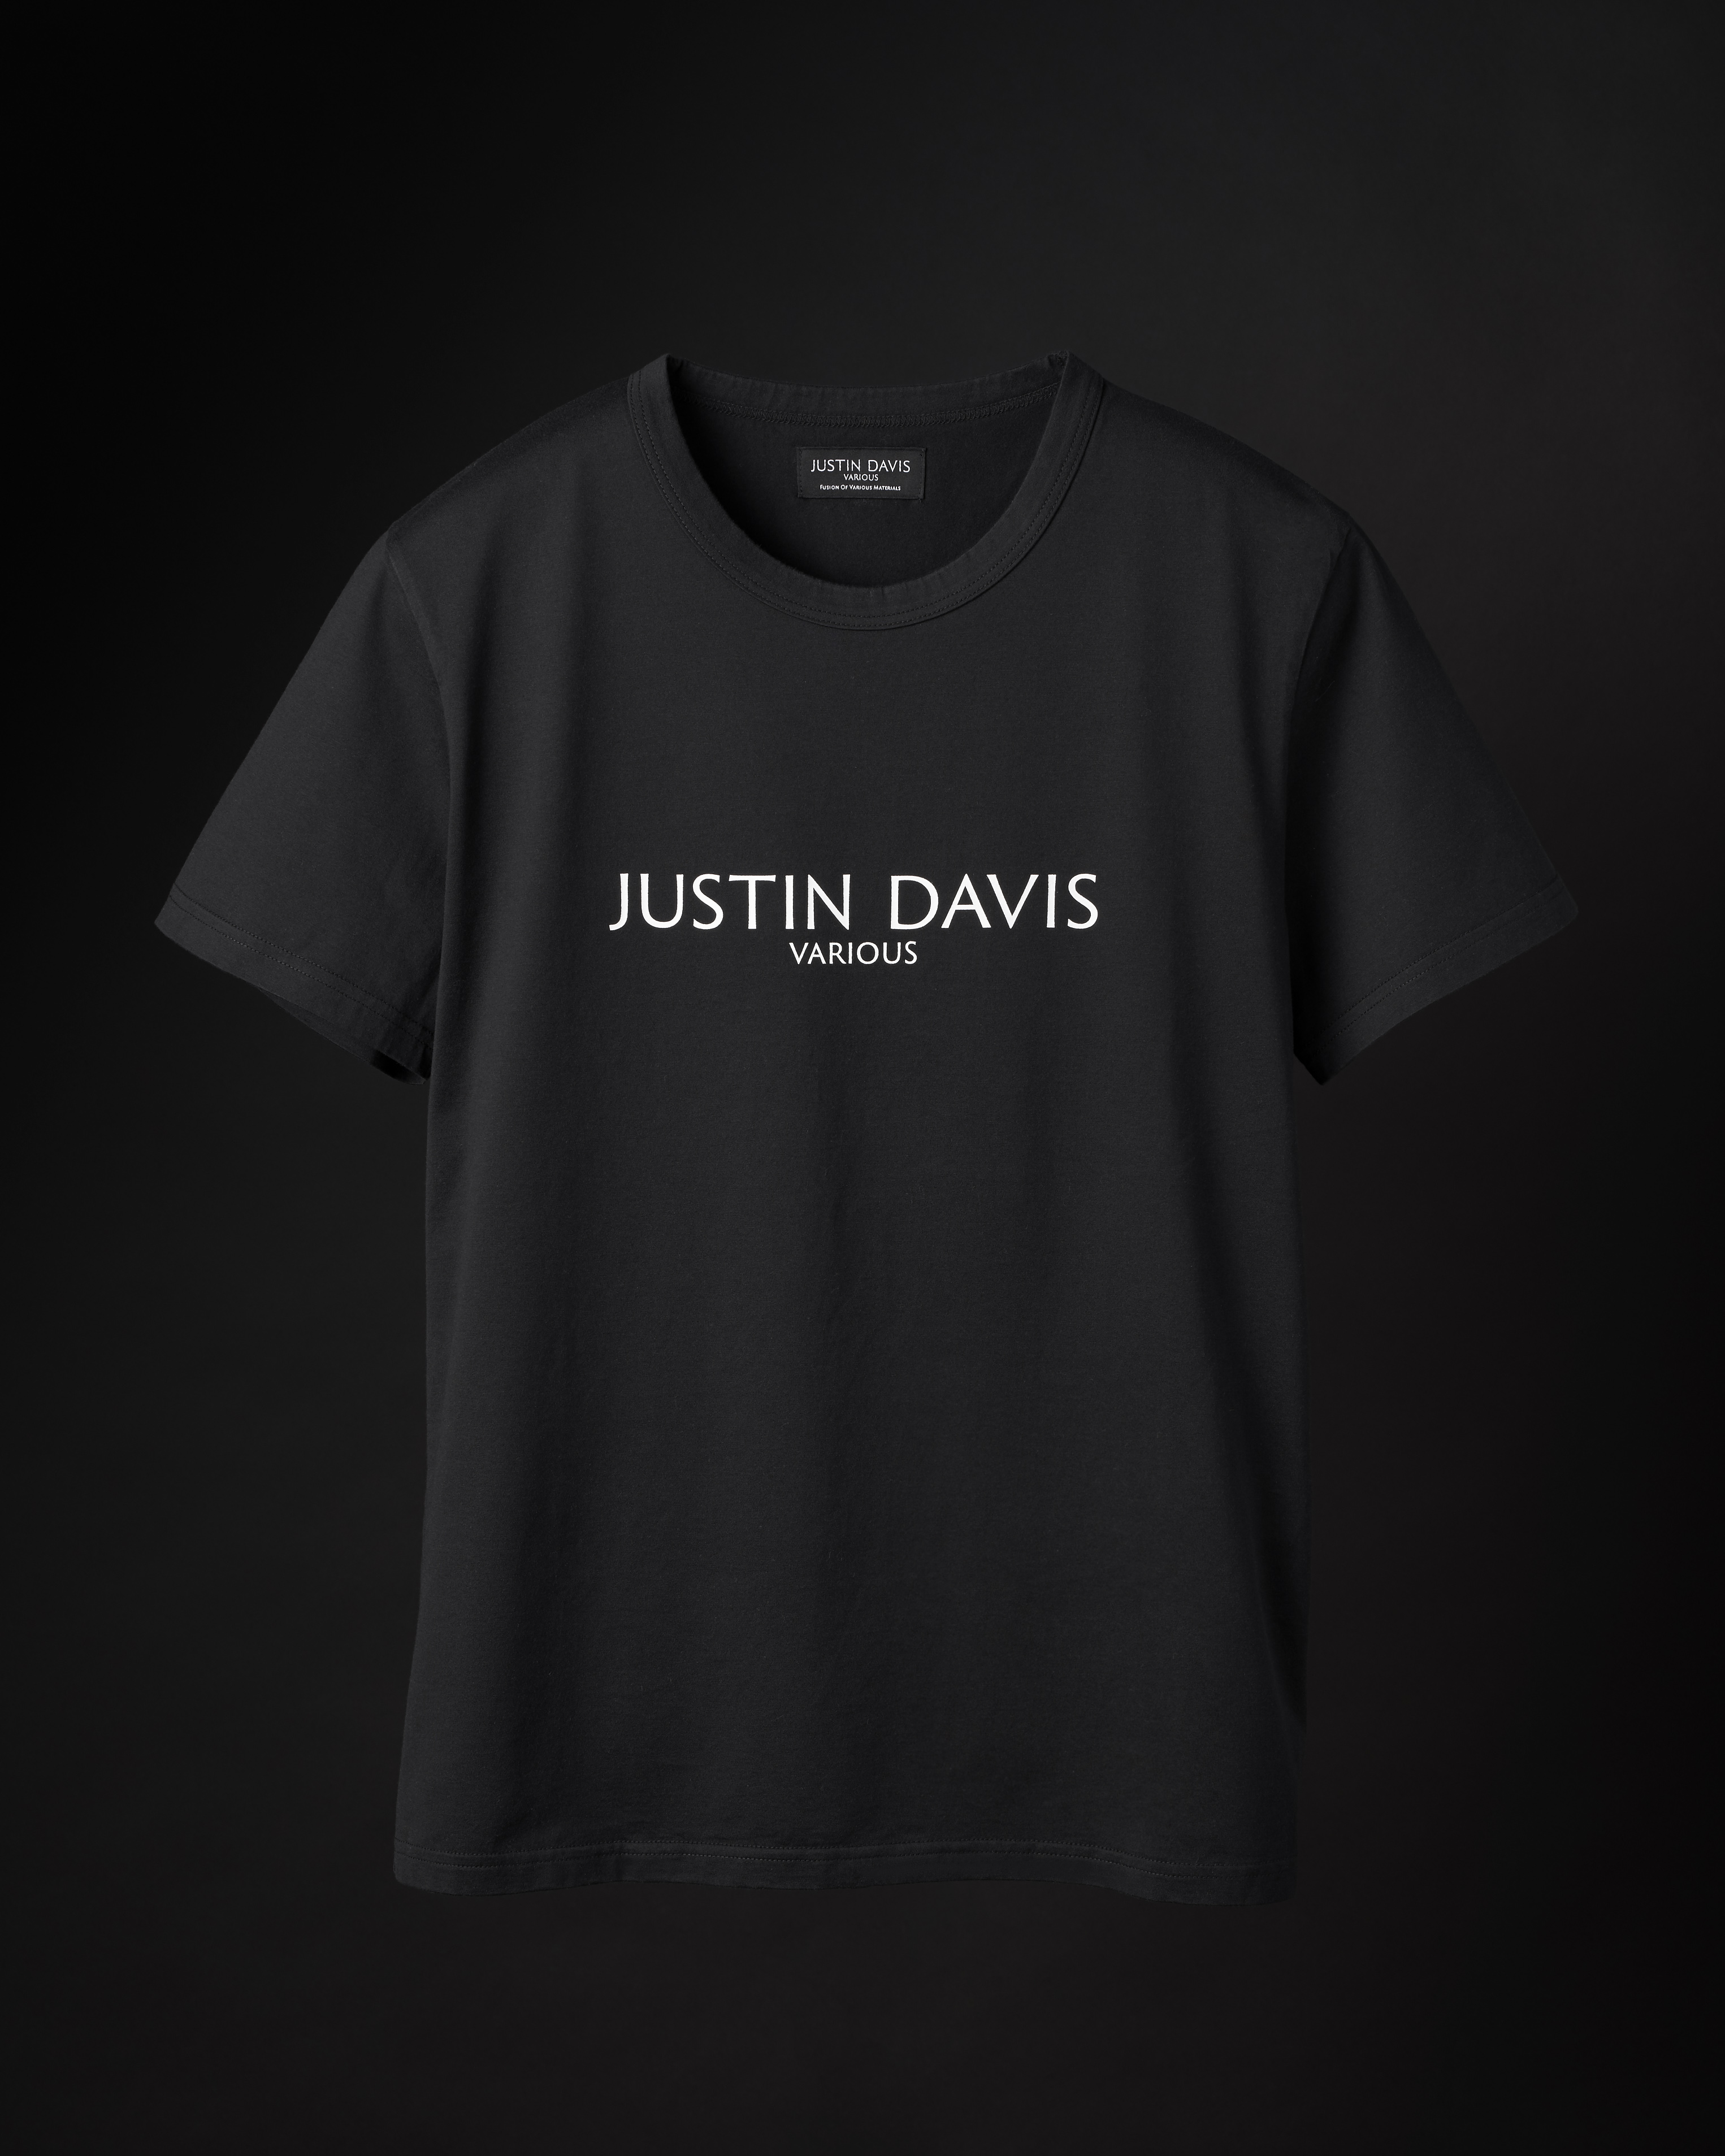 Justin Davis Various Clothingからブランド初となる ウェアライン Wear That Inspires が登場 ジャスティンデイビスofficial